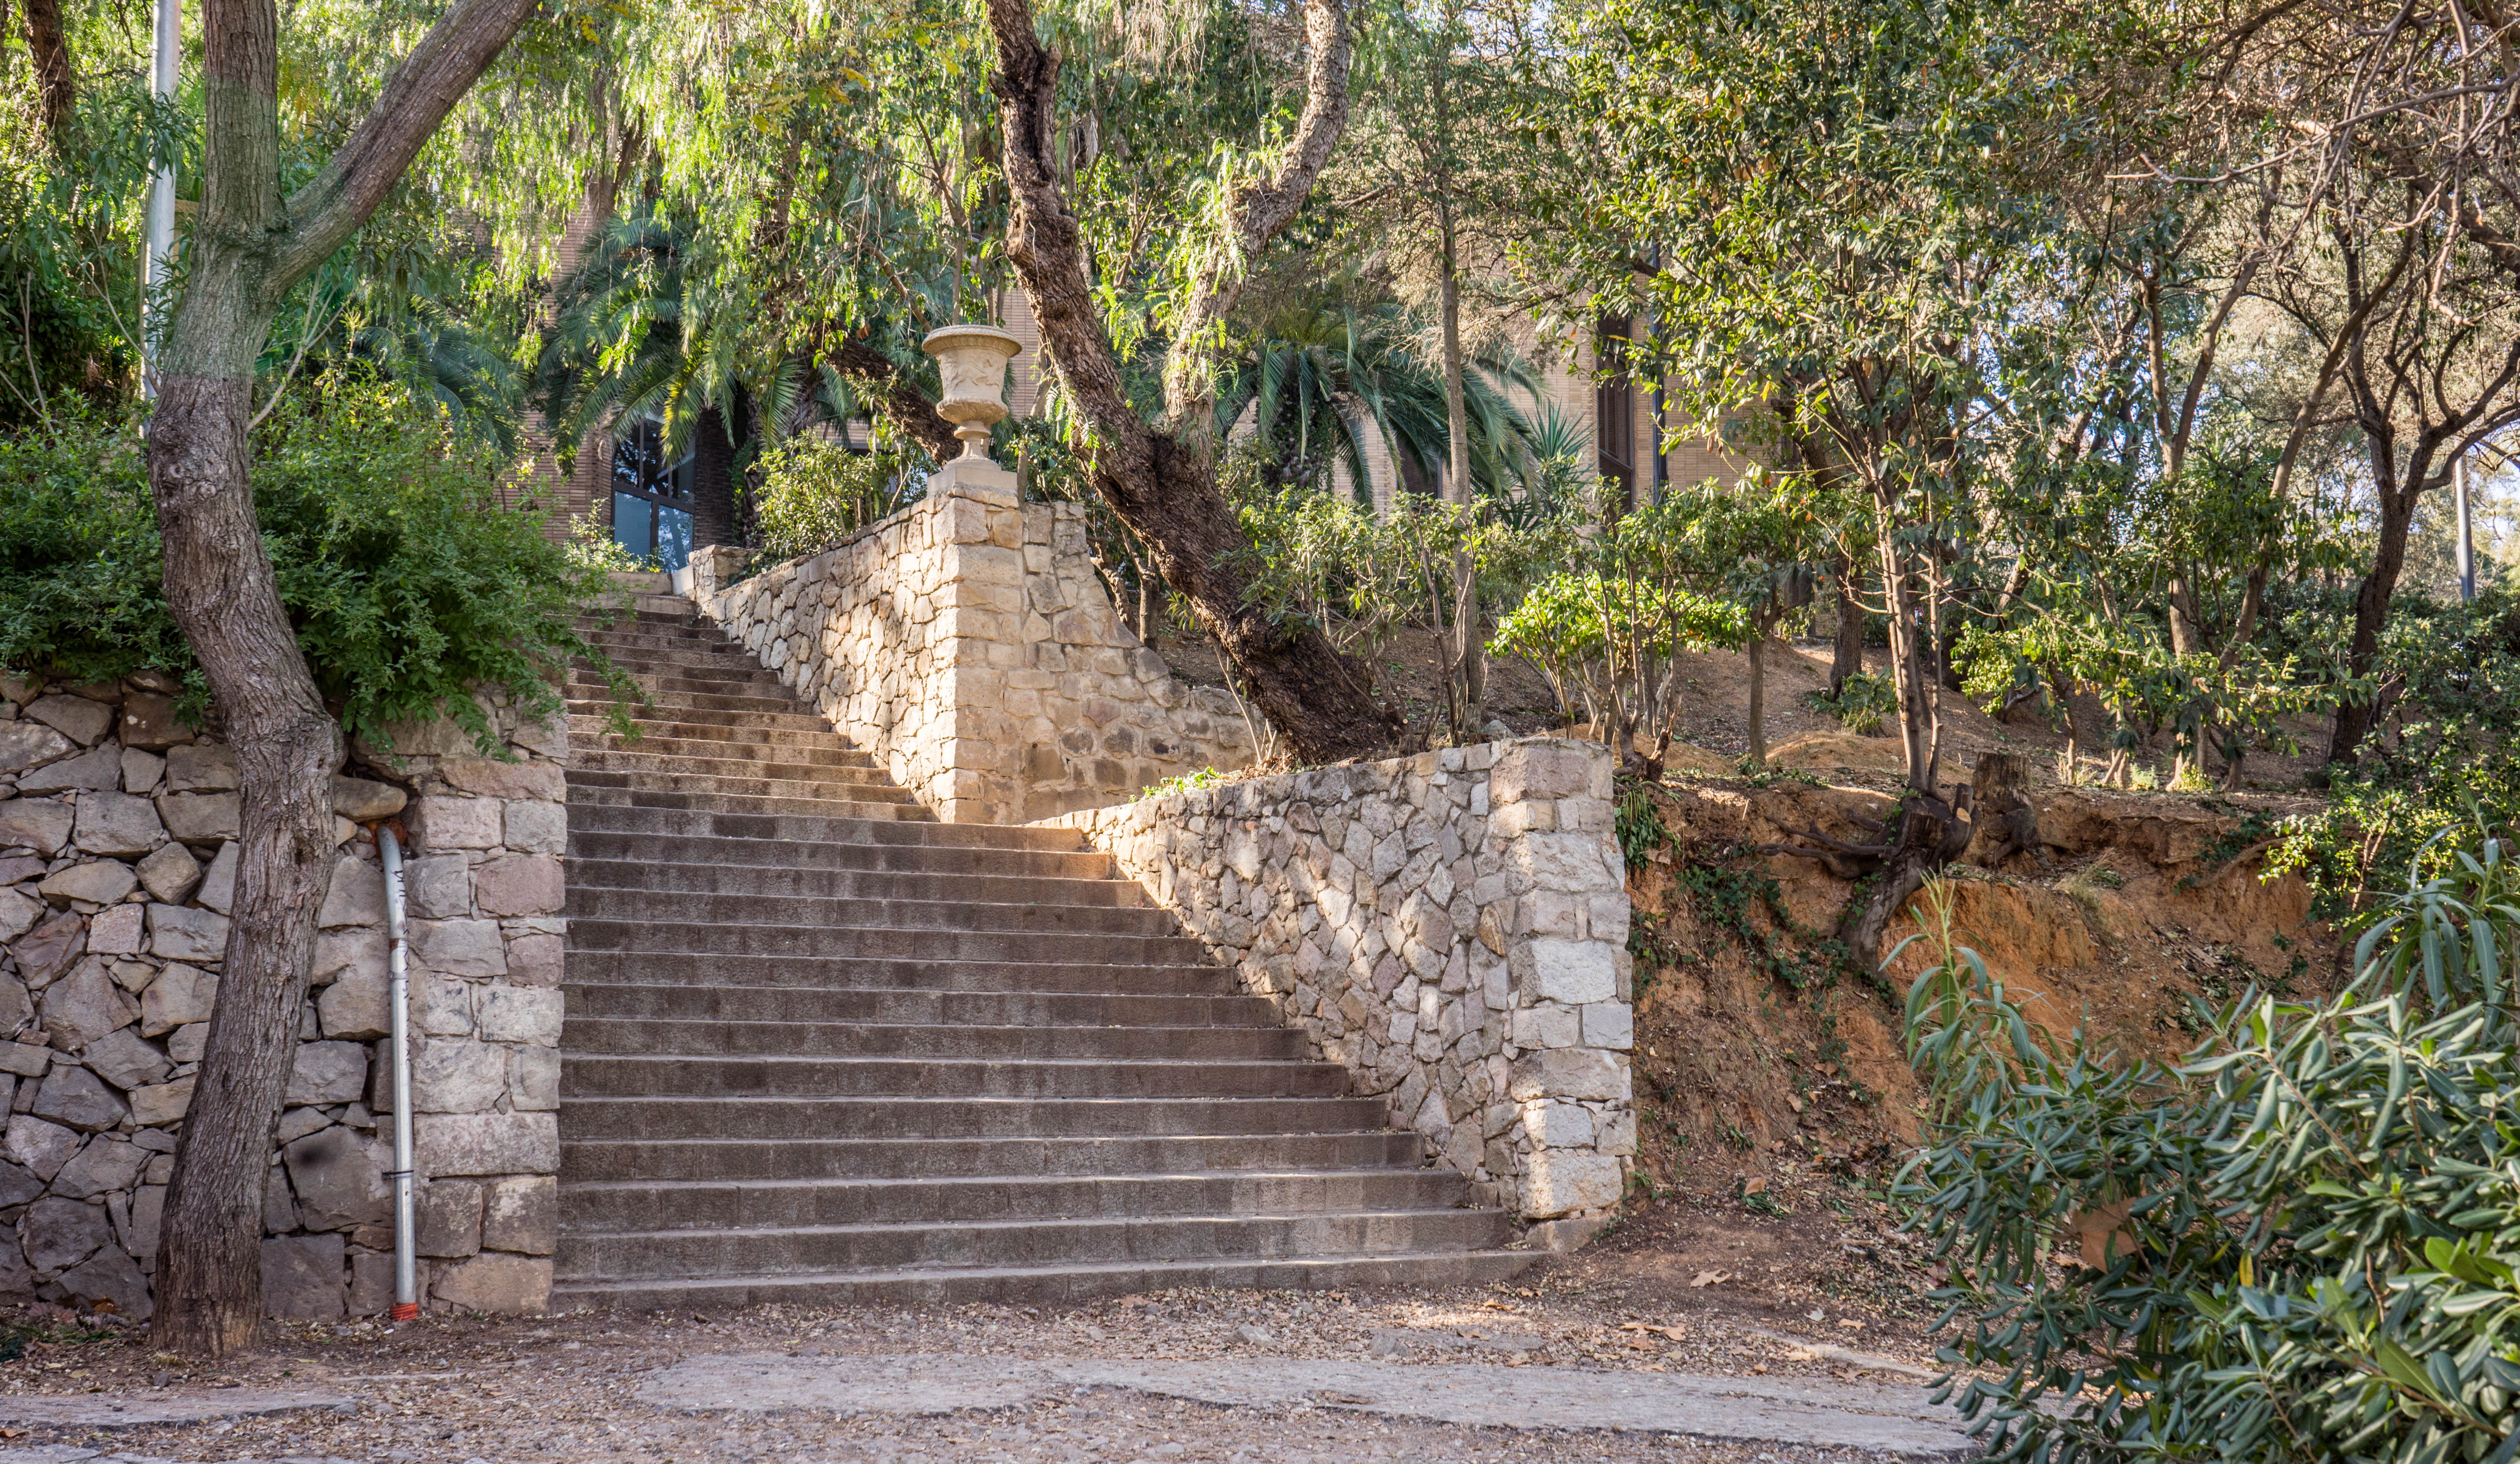 Free Images : landscape, tree, nature, outdoor, wall, steps ...